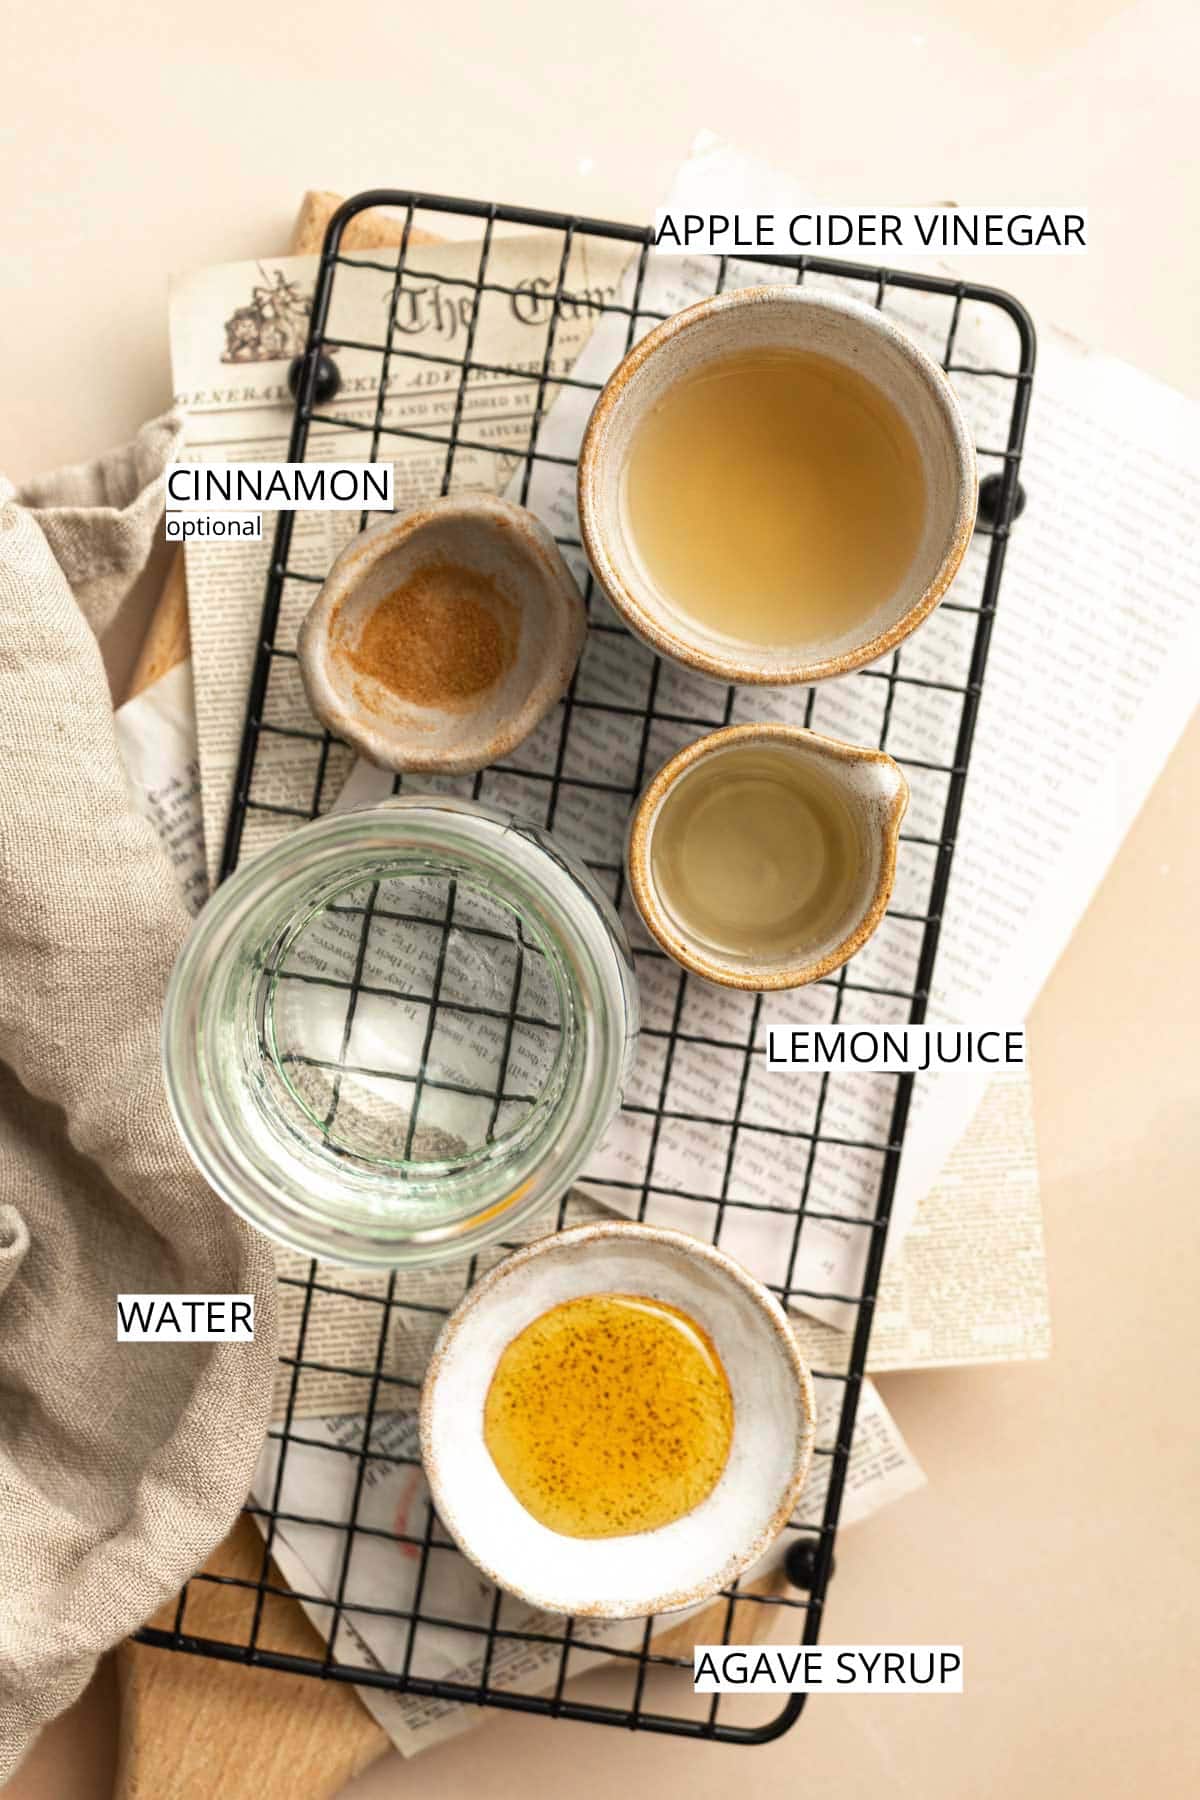 Apple cider vinegar, cinnamon, lemon juice, water and agave syrup laid out on a flat surface.